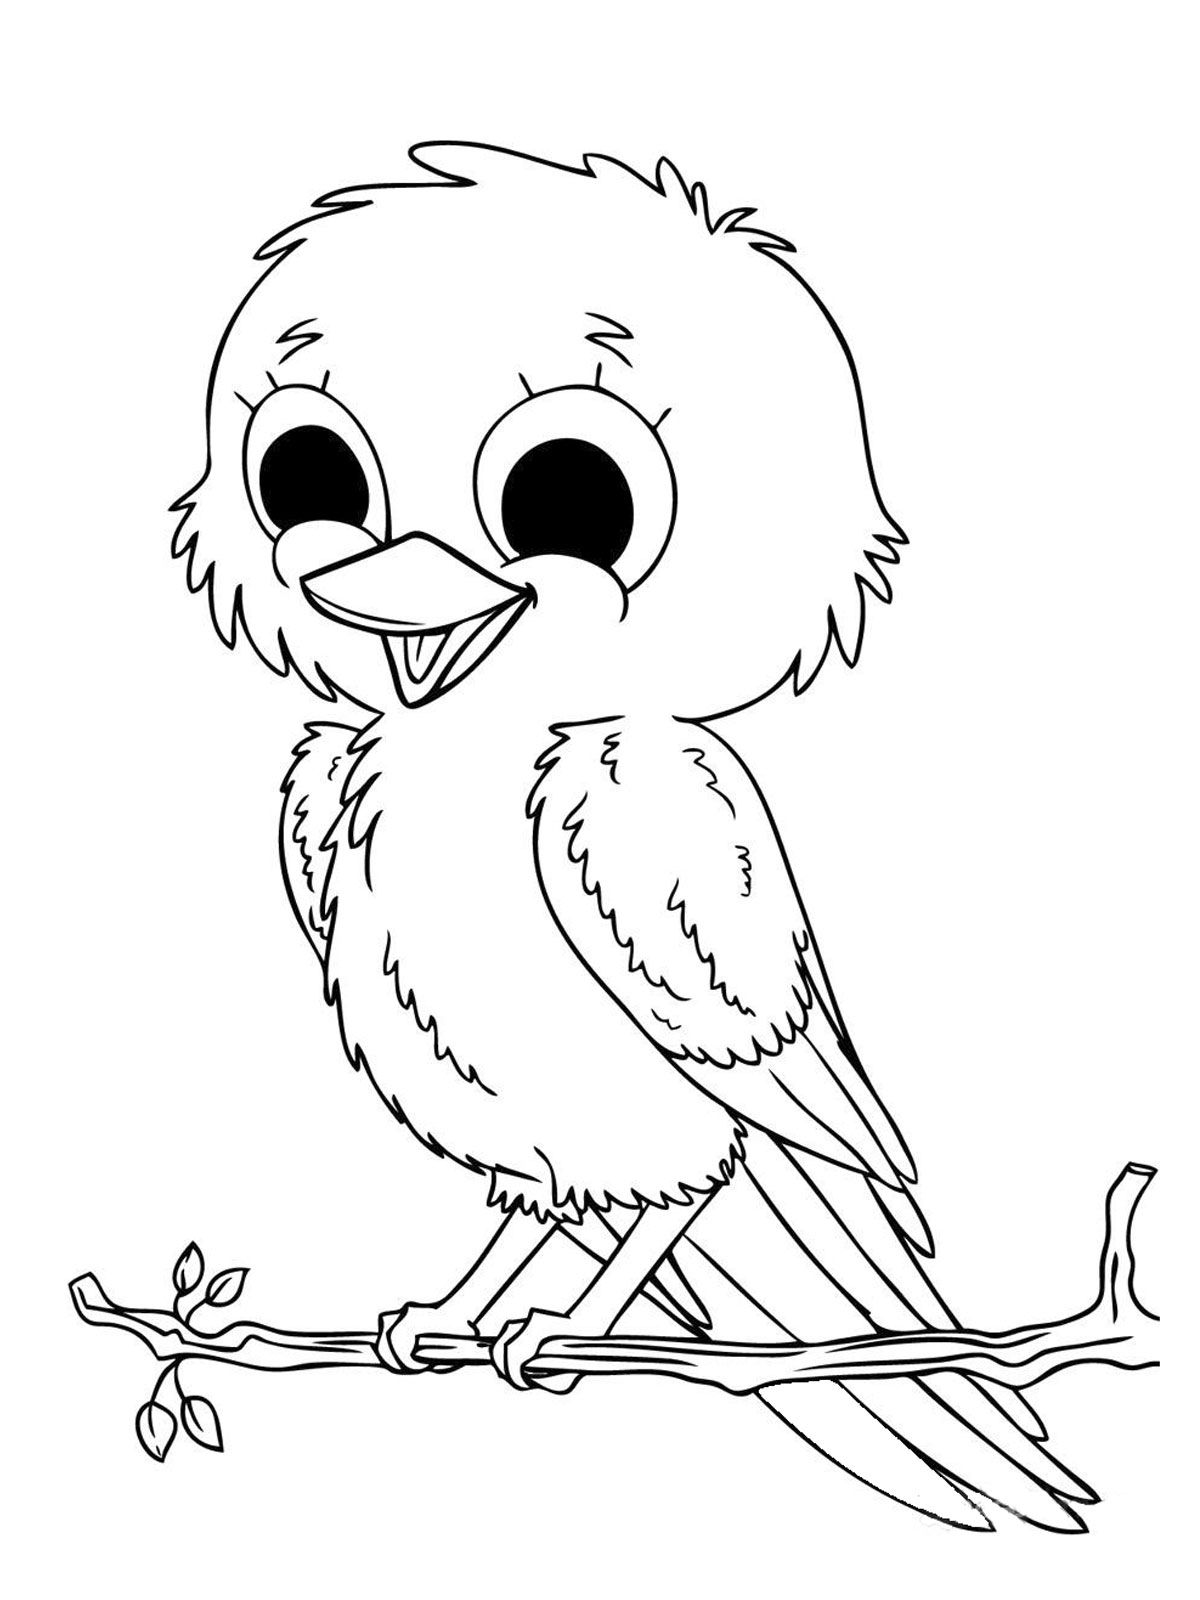 get-this-cute-baby-animal-coloring-pages-to-print-6fg7s